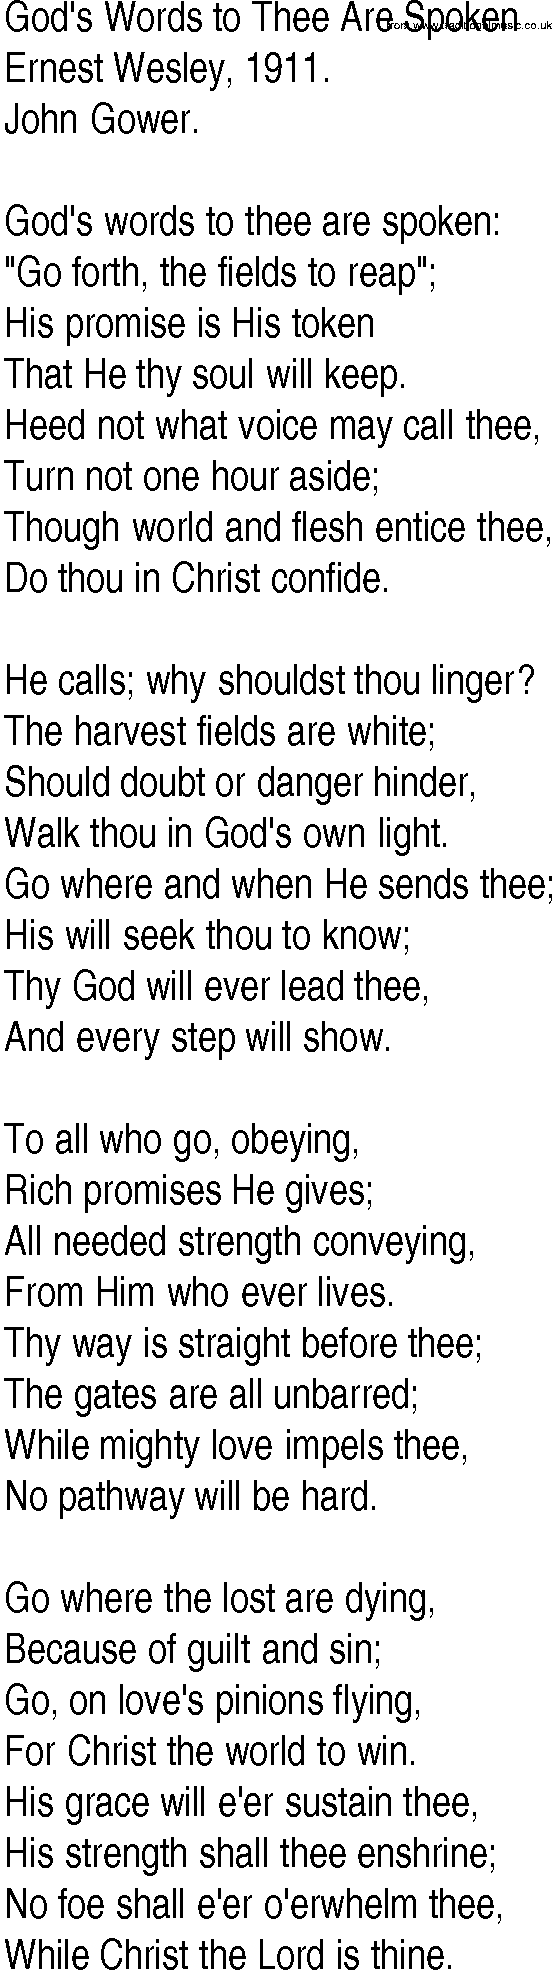 Hymn and Gospel Song: God's Words to Thee Are Spoken by Ernest Wesley lyrics